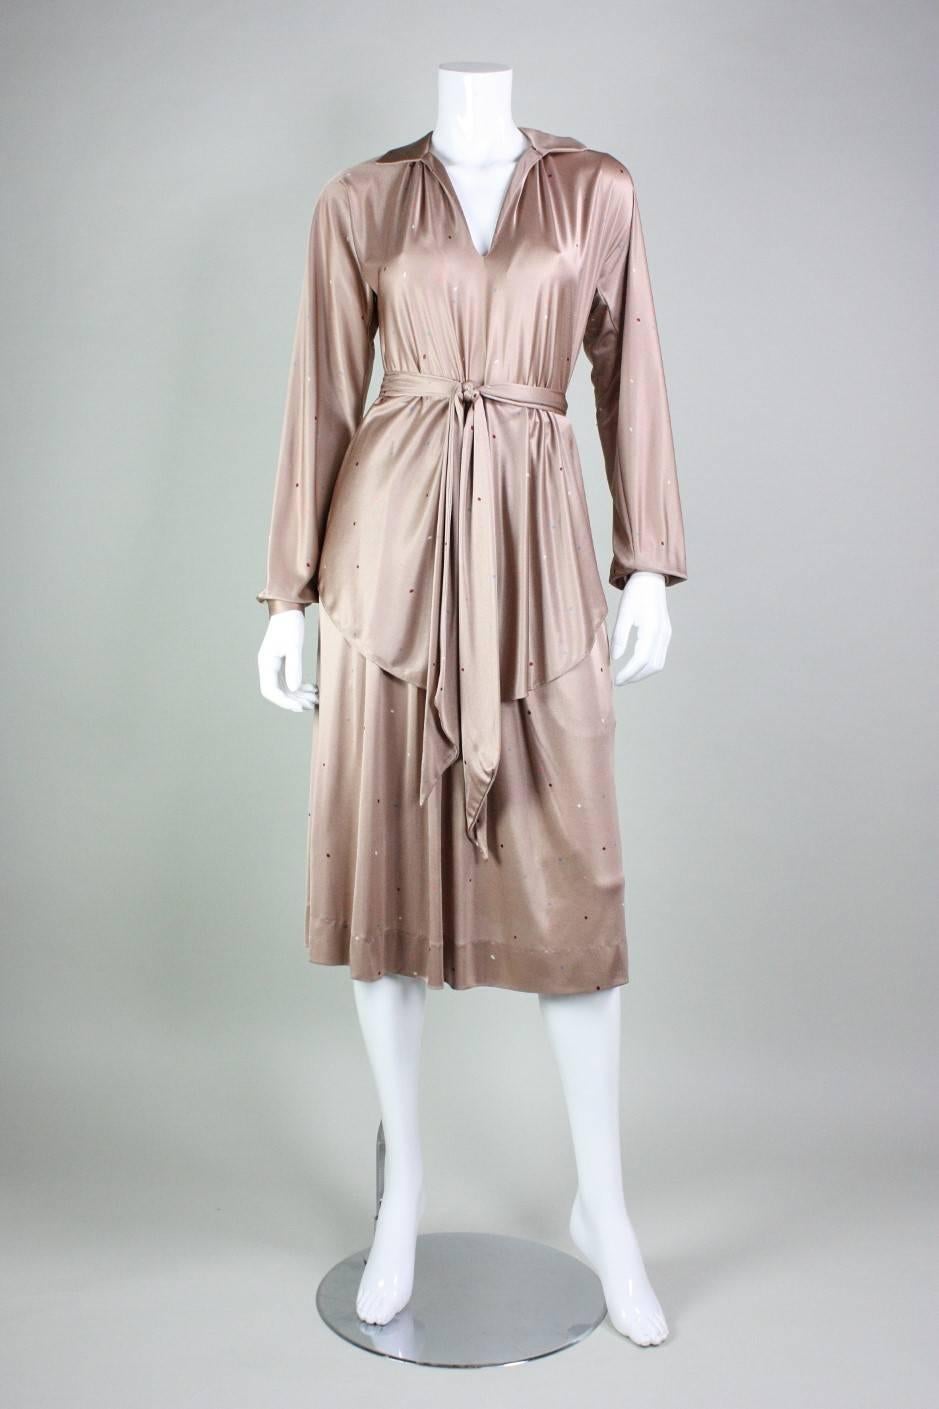 Vintage ensemble dates to the 1970's and was manufactured by Halston IV.  It is made of a super soft and liquid-like tan polyester jersey with a dot print.  Tunic blouse has a v-neck, turn down collar, and snap cuffs.  Below knee-length skirt has a